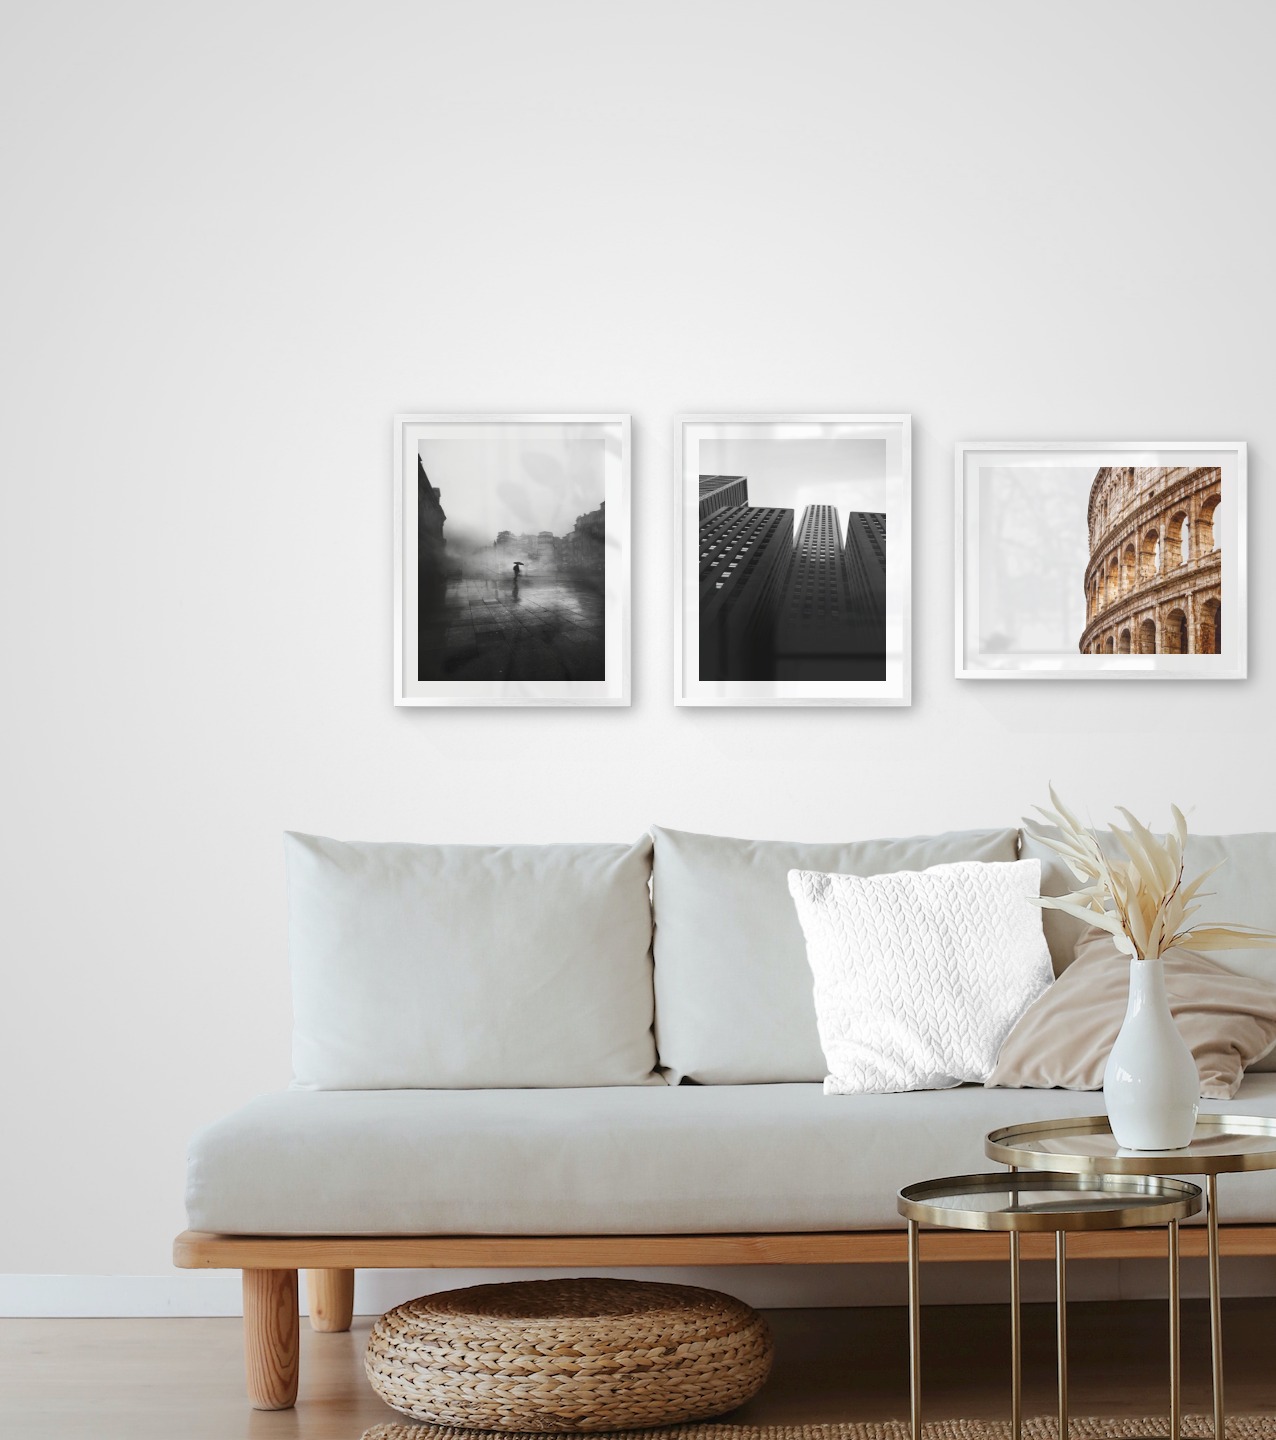 Gallery wall with picture frames in silver in sizes 40x50 with prints "Rainy city", "High buildings" and "Colosseum and Rome"